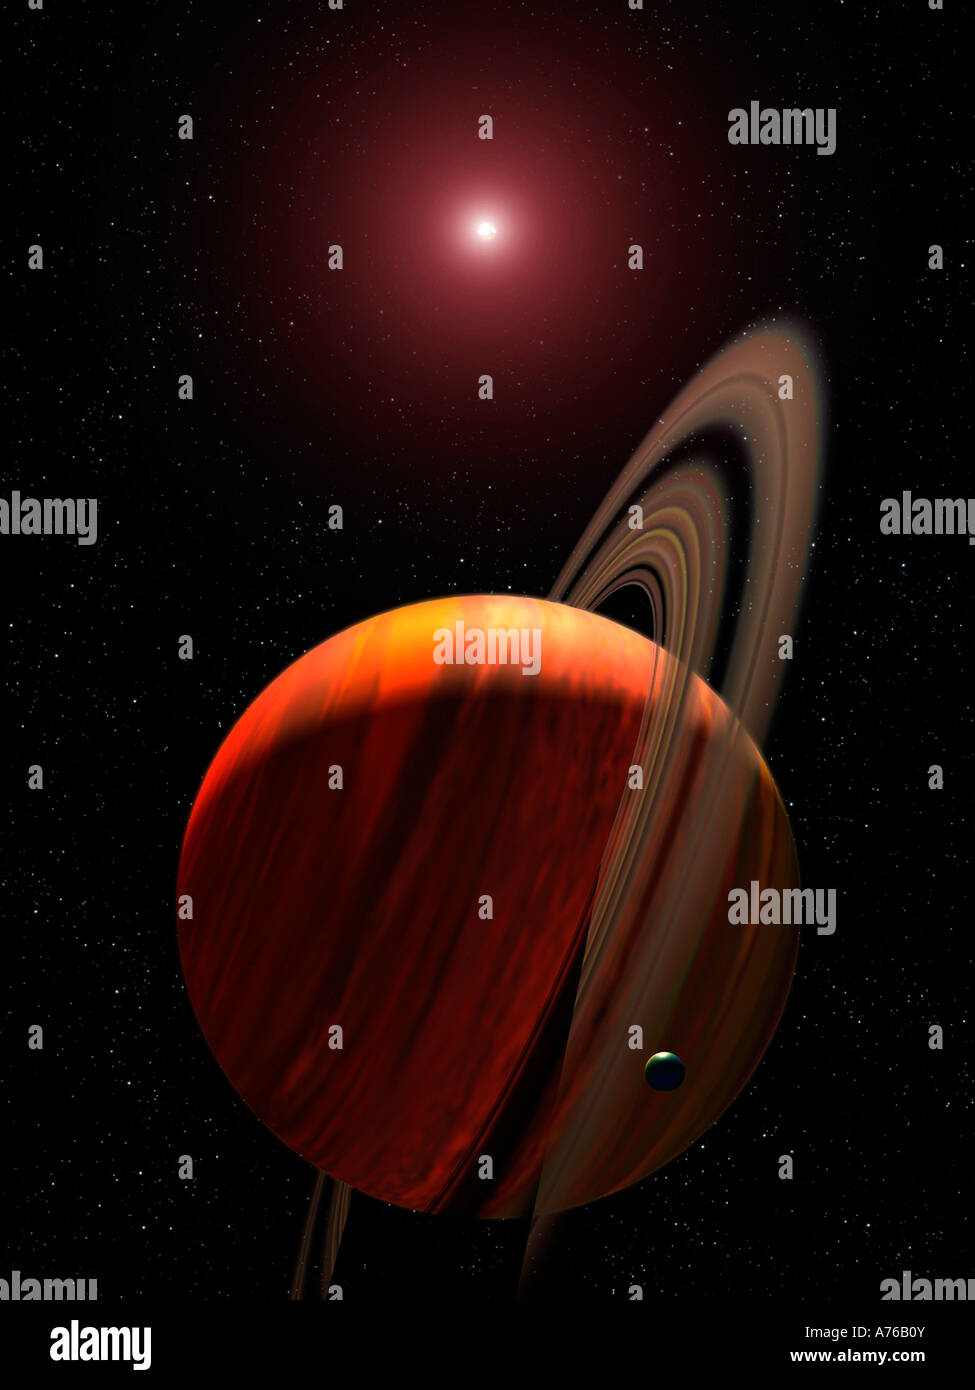 An artist's concept of a gas giant planet orbiting a red dwarf K star. Stock Photo